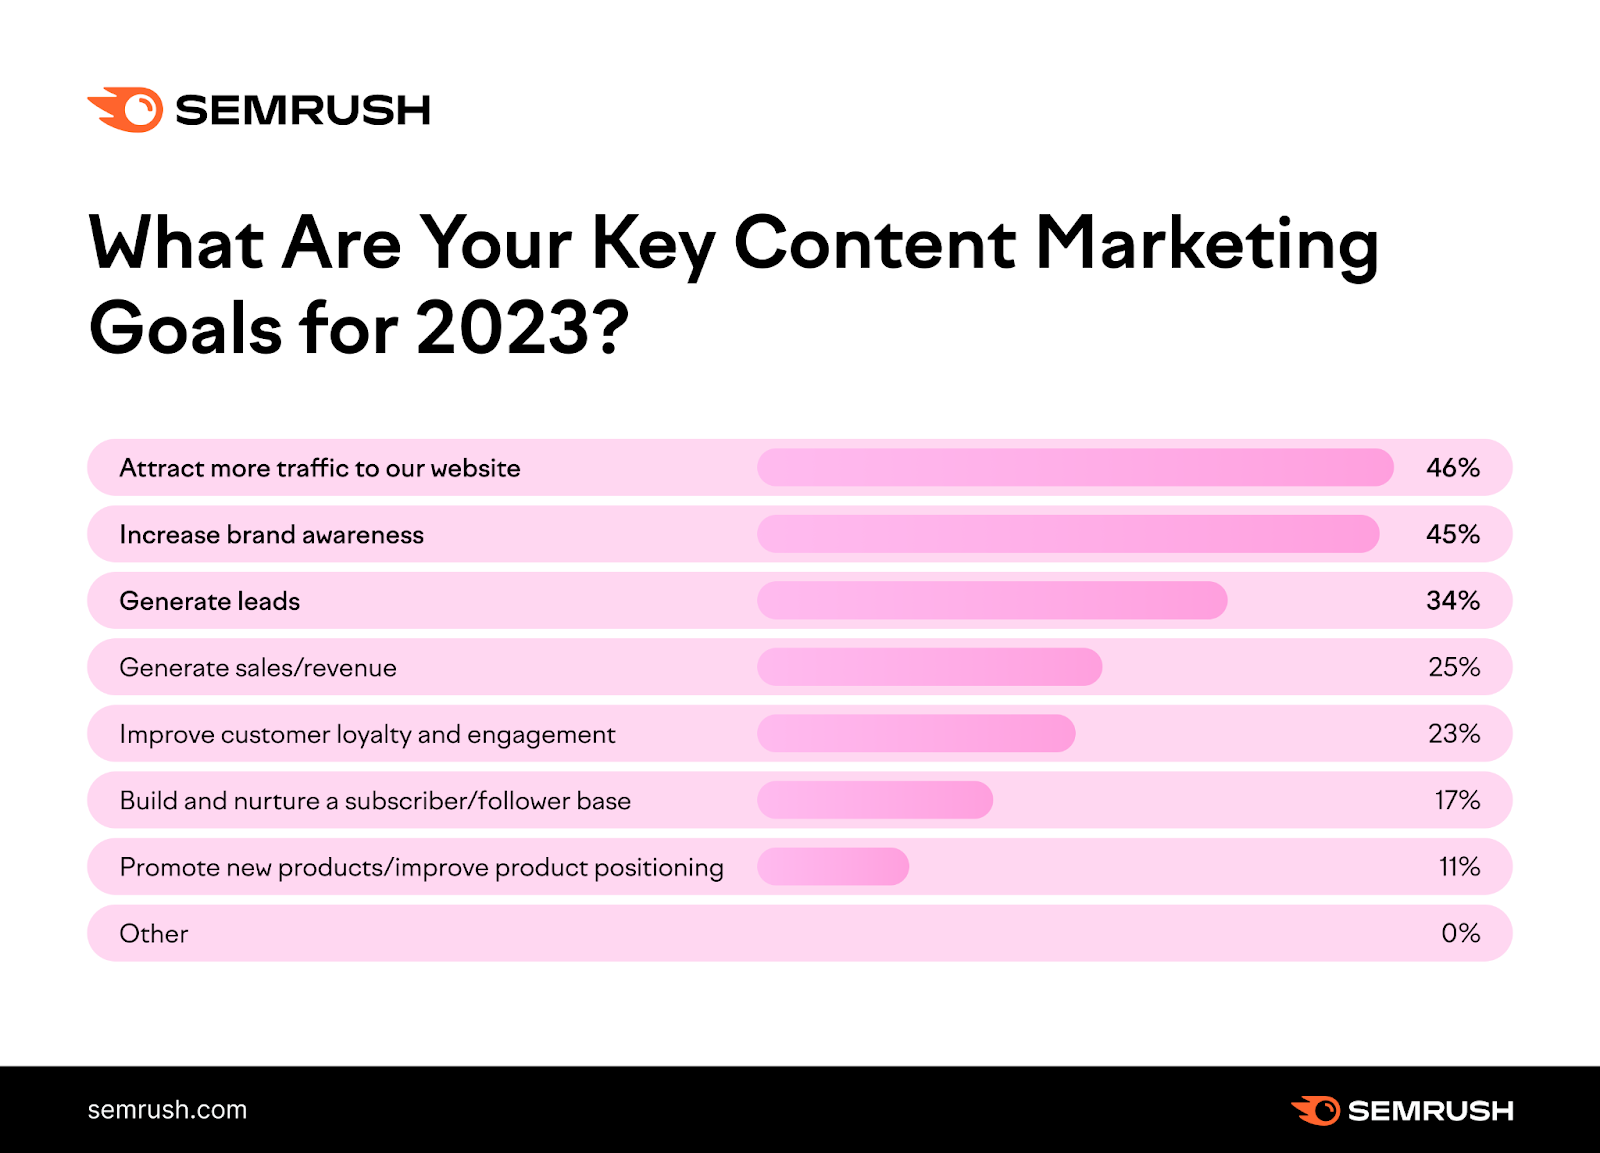 Content marketing doesn't merely mean publishing more and more content